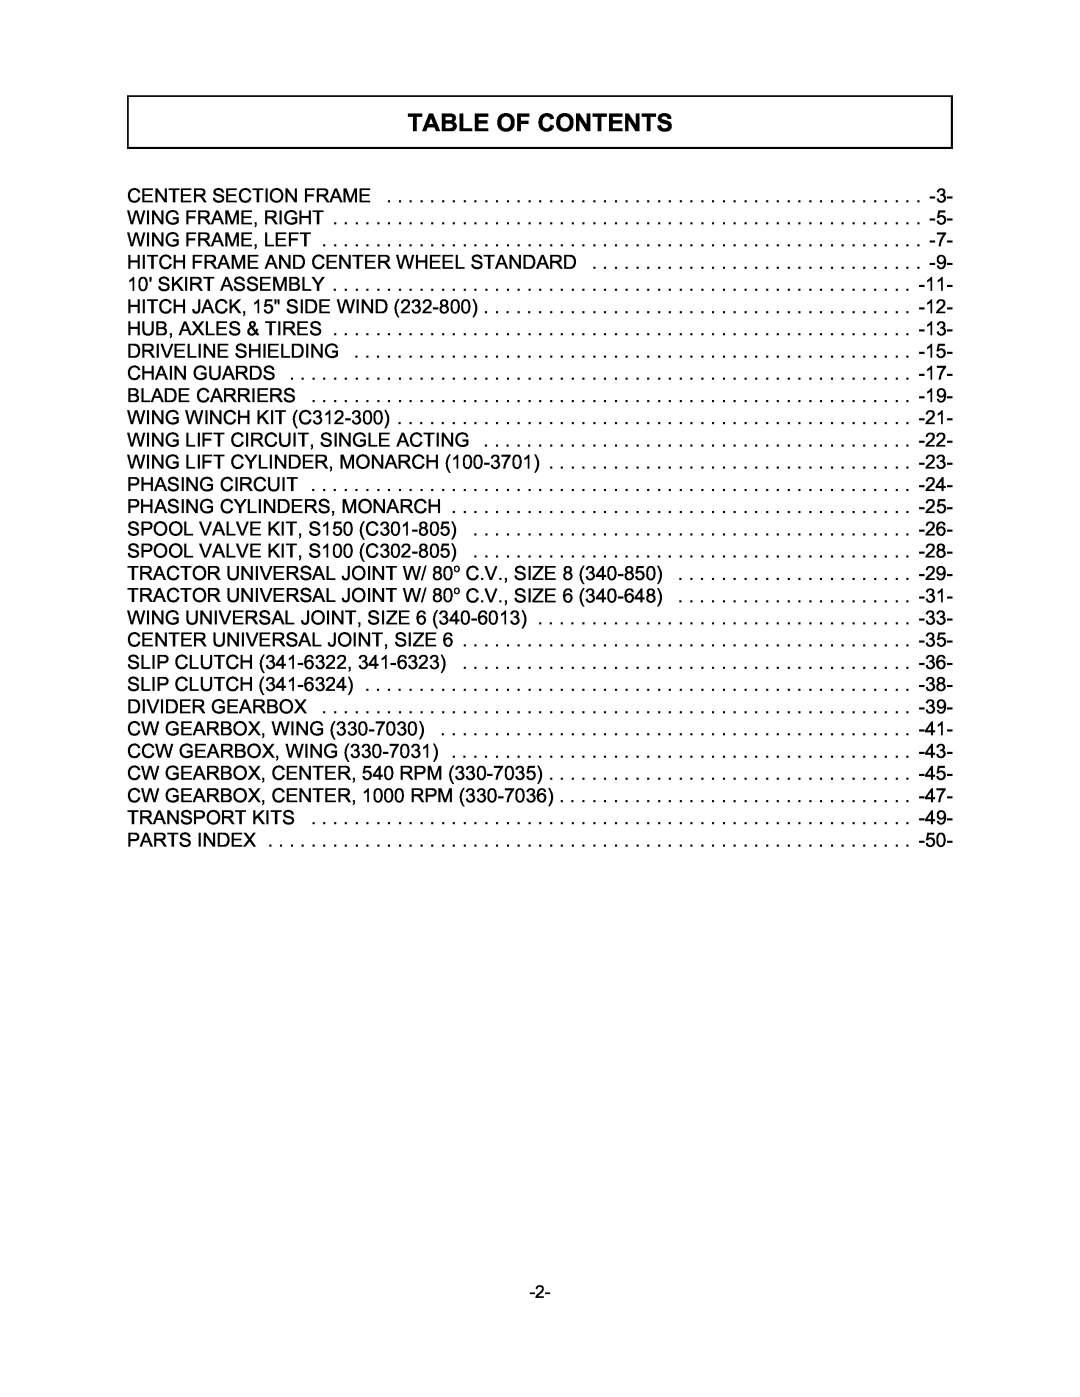 Tiger TWR-180, TWR-120 manual Table Of Contents 